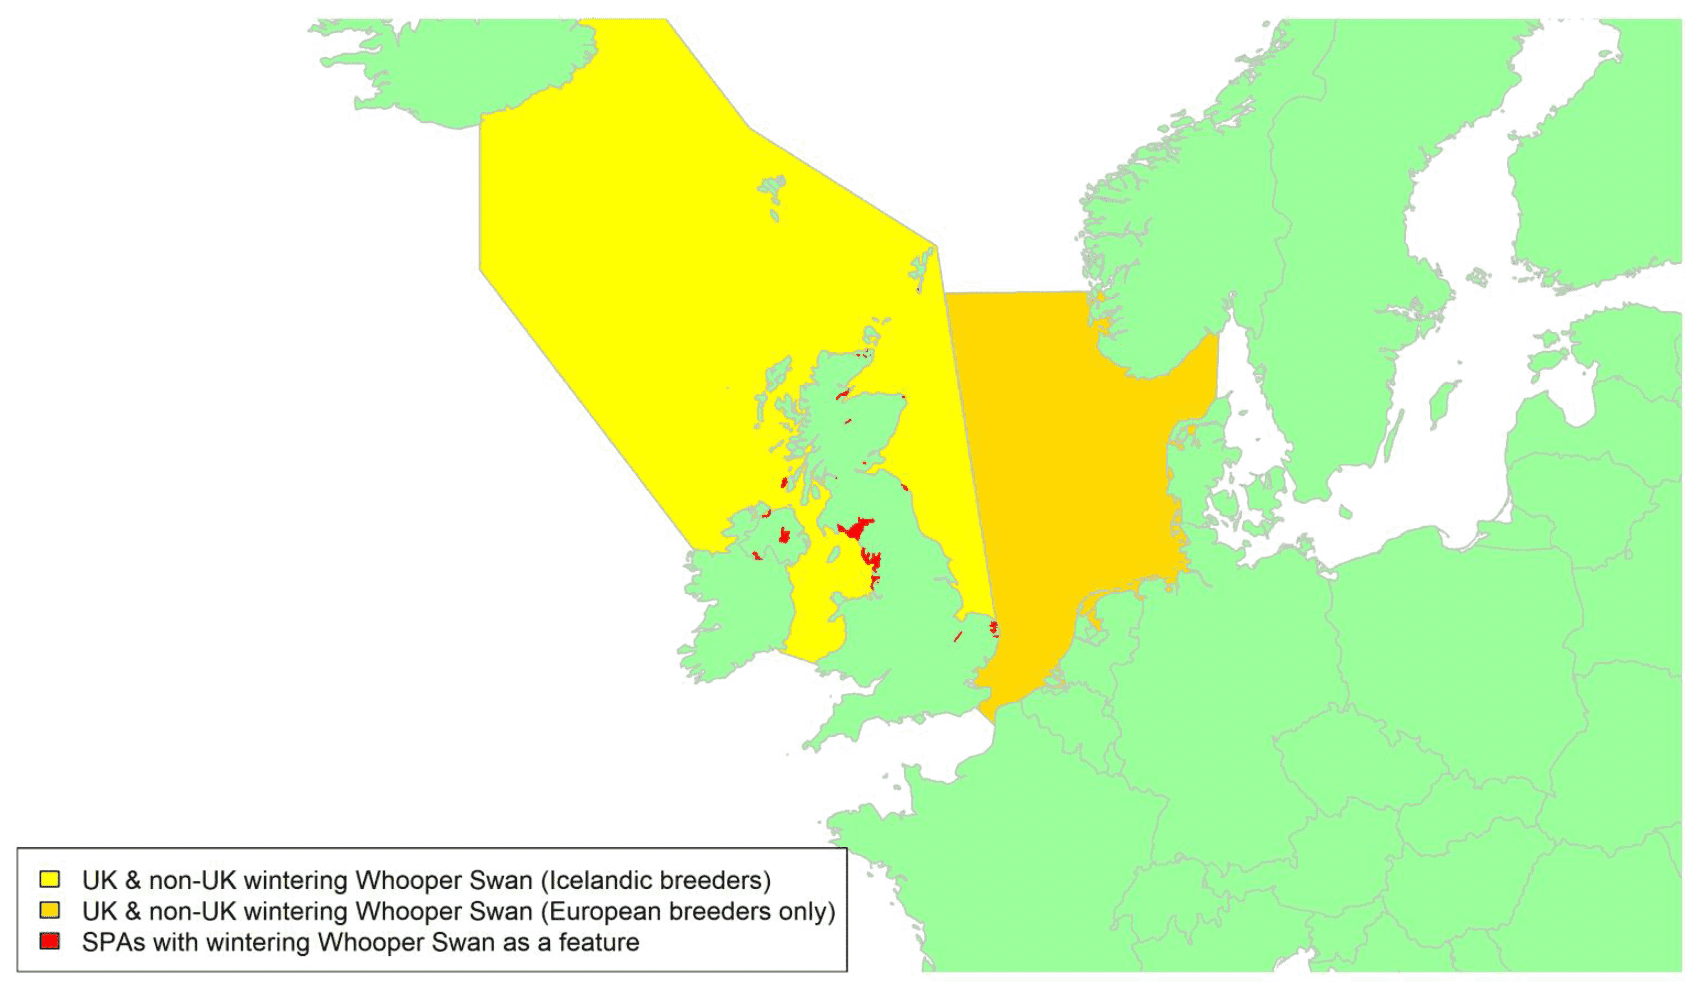 Map of North West Europe showing migratory routes and SPAs within the UK for Whooper Swan as described in the text below.